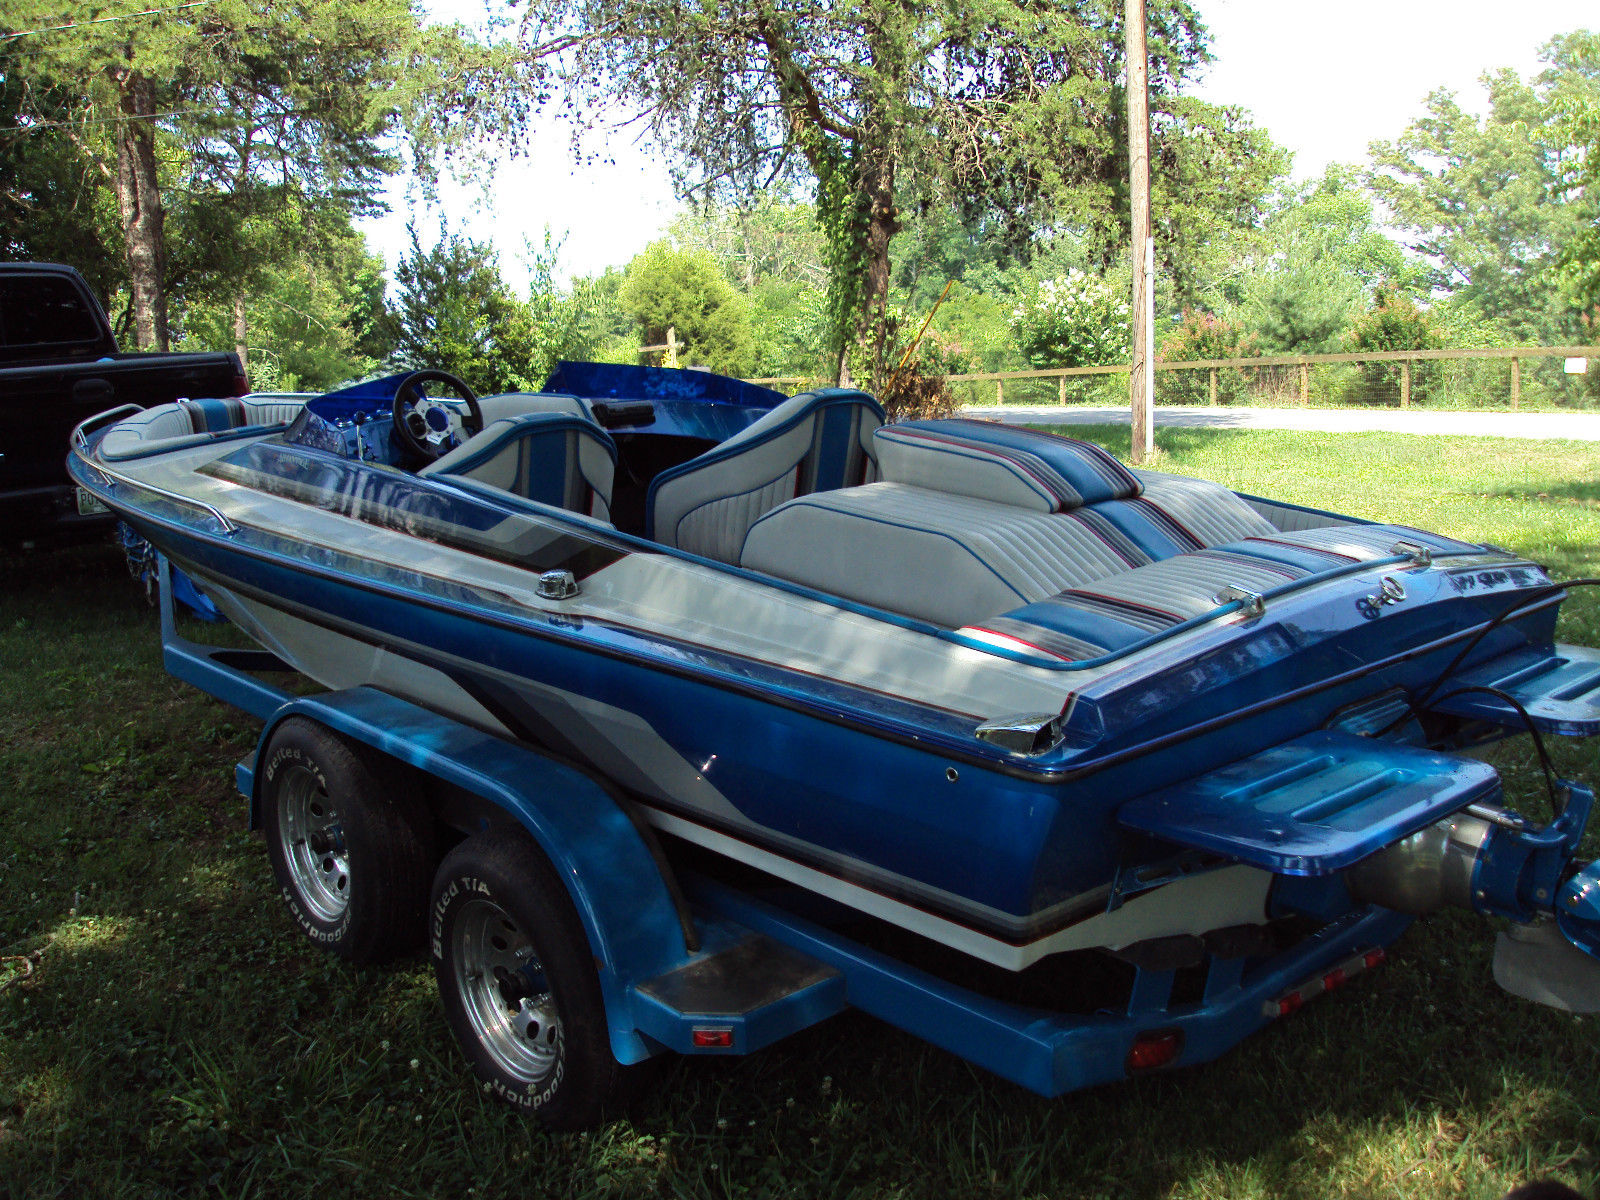 Advantage 205 Classic Bowrider Boat For Sale From Usa